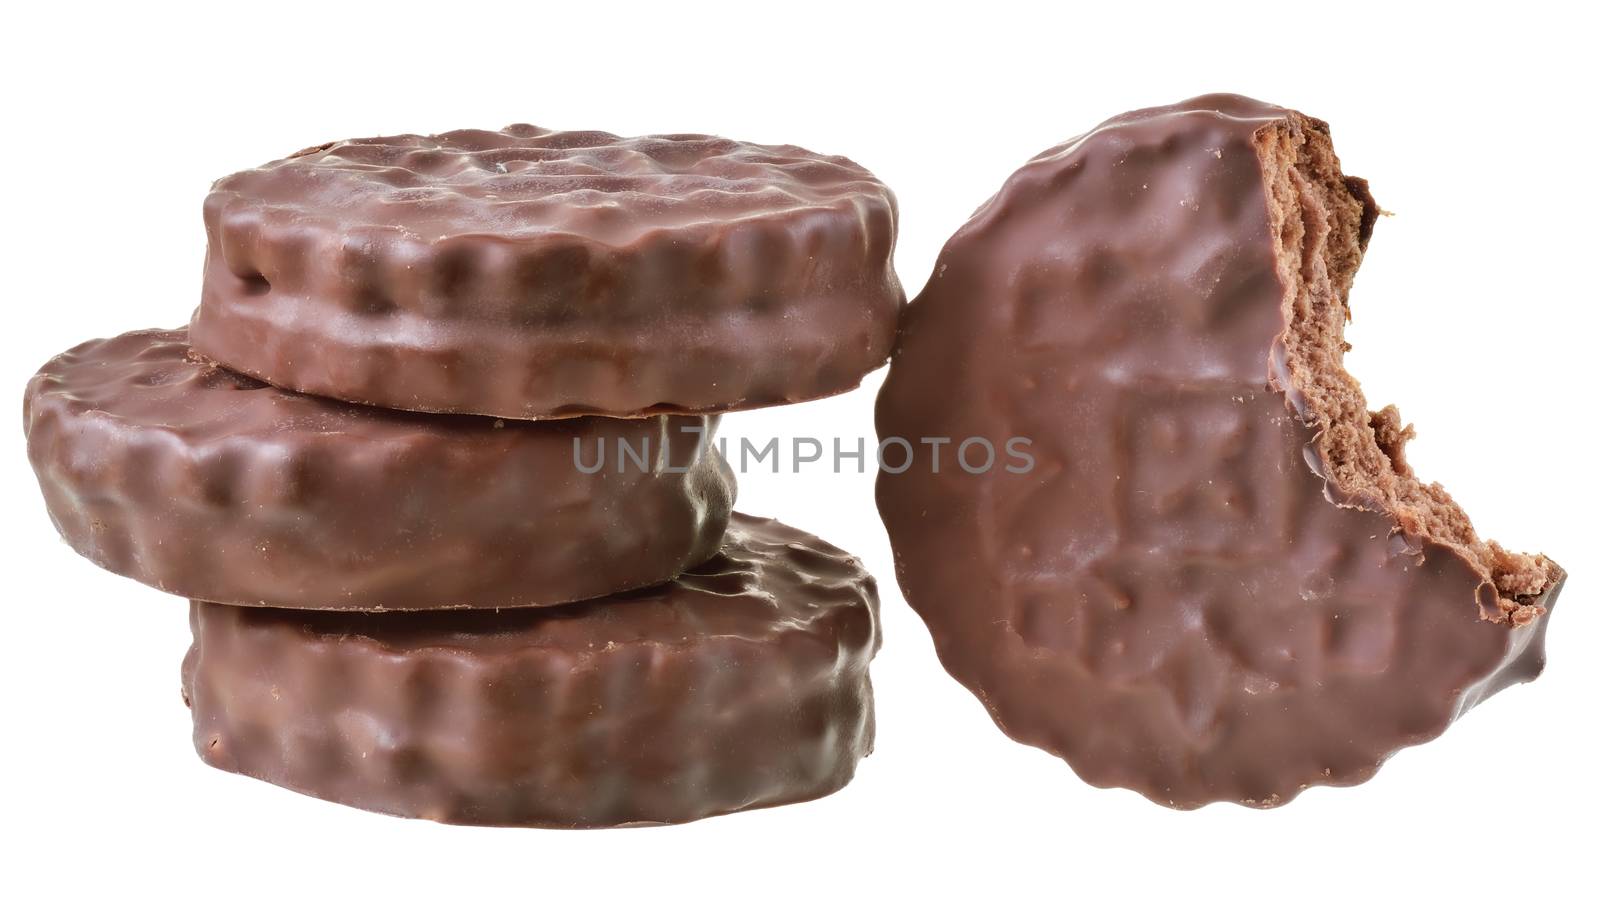 Shortbread cookie sandwich in chocolate icing by Grisha